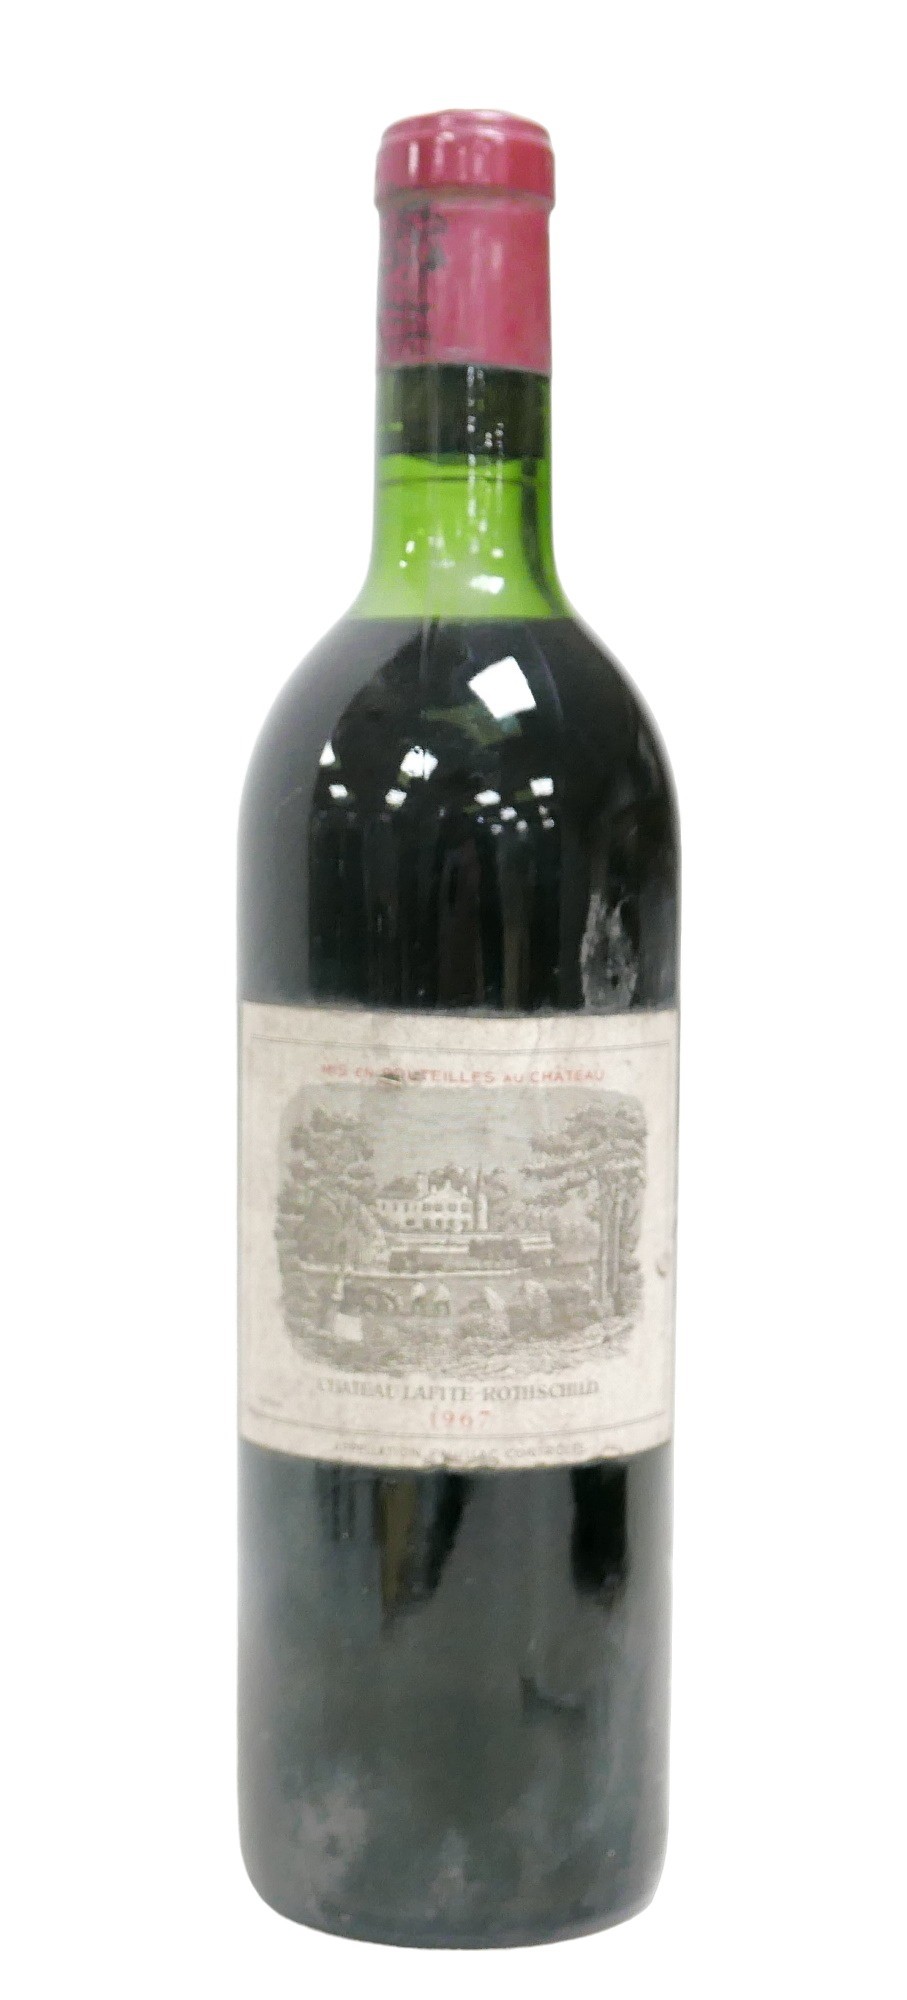 Vintage wine: a bottle of 1967 Chateau Lafite-Rothschild, Pauillac, U: near top of shoulder.